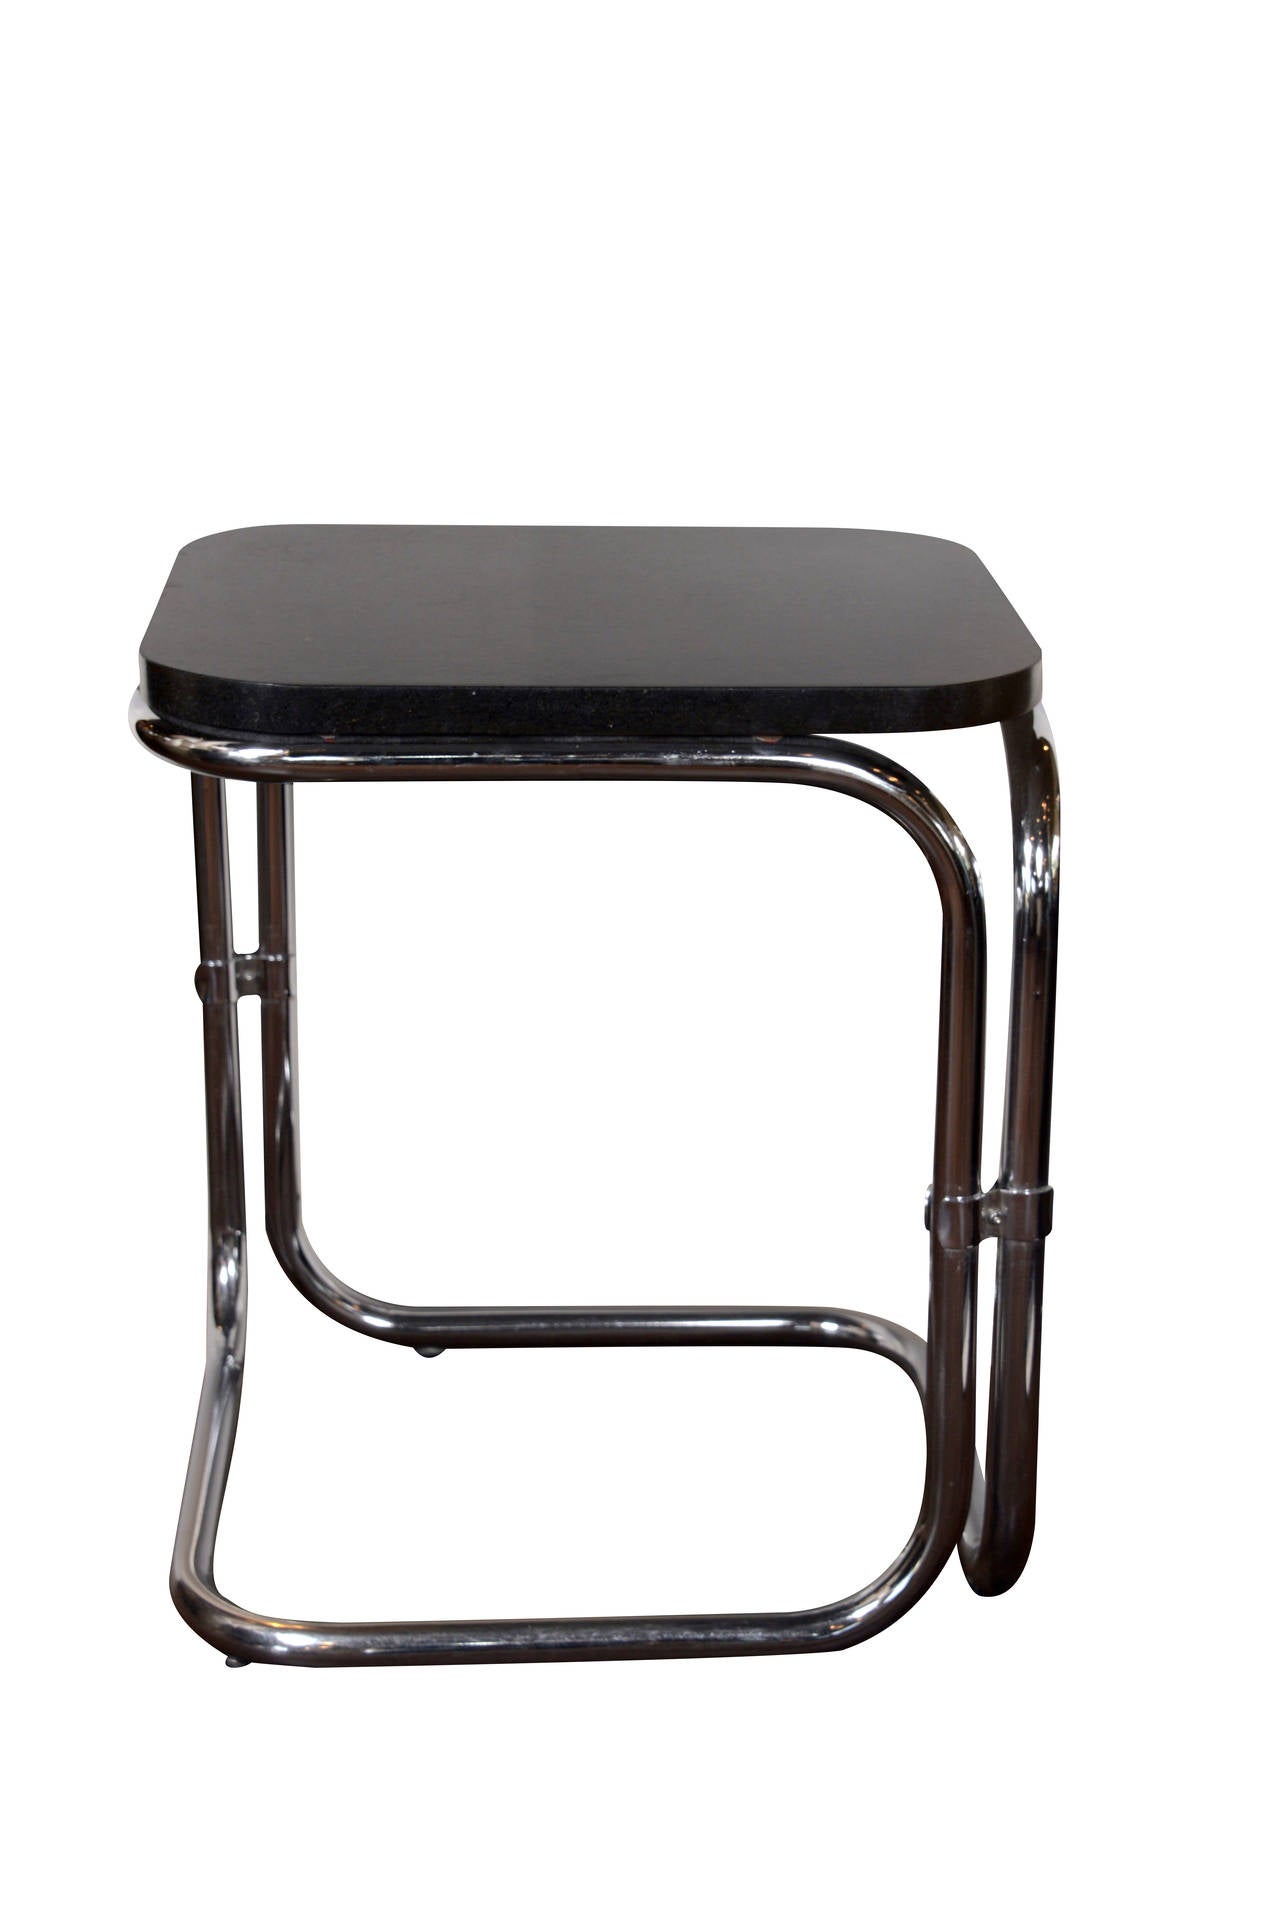 Contemporary french black and silver tables, 28